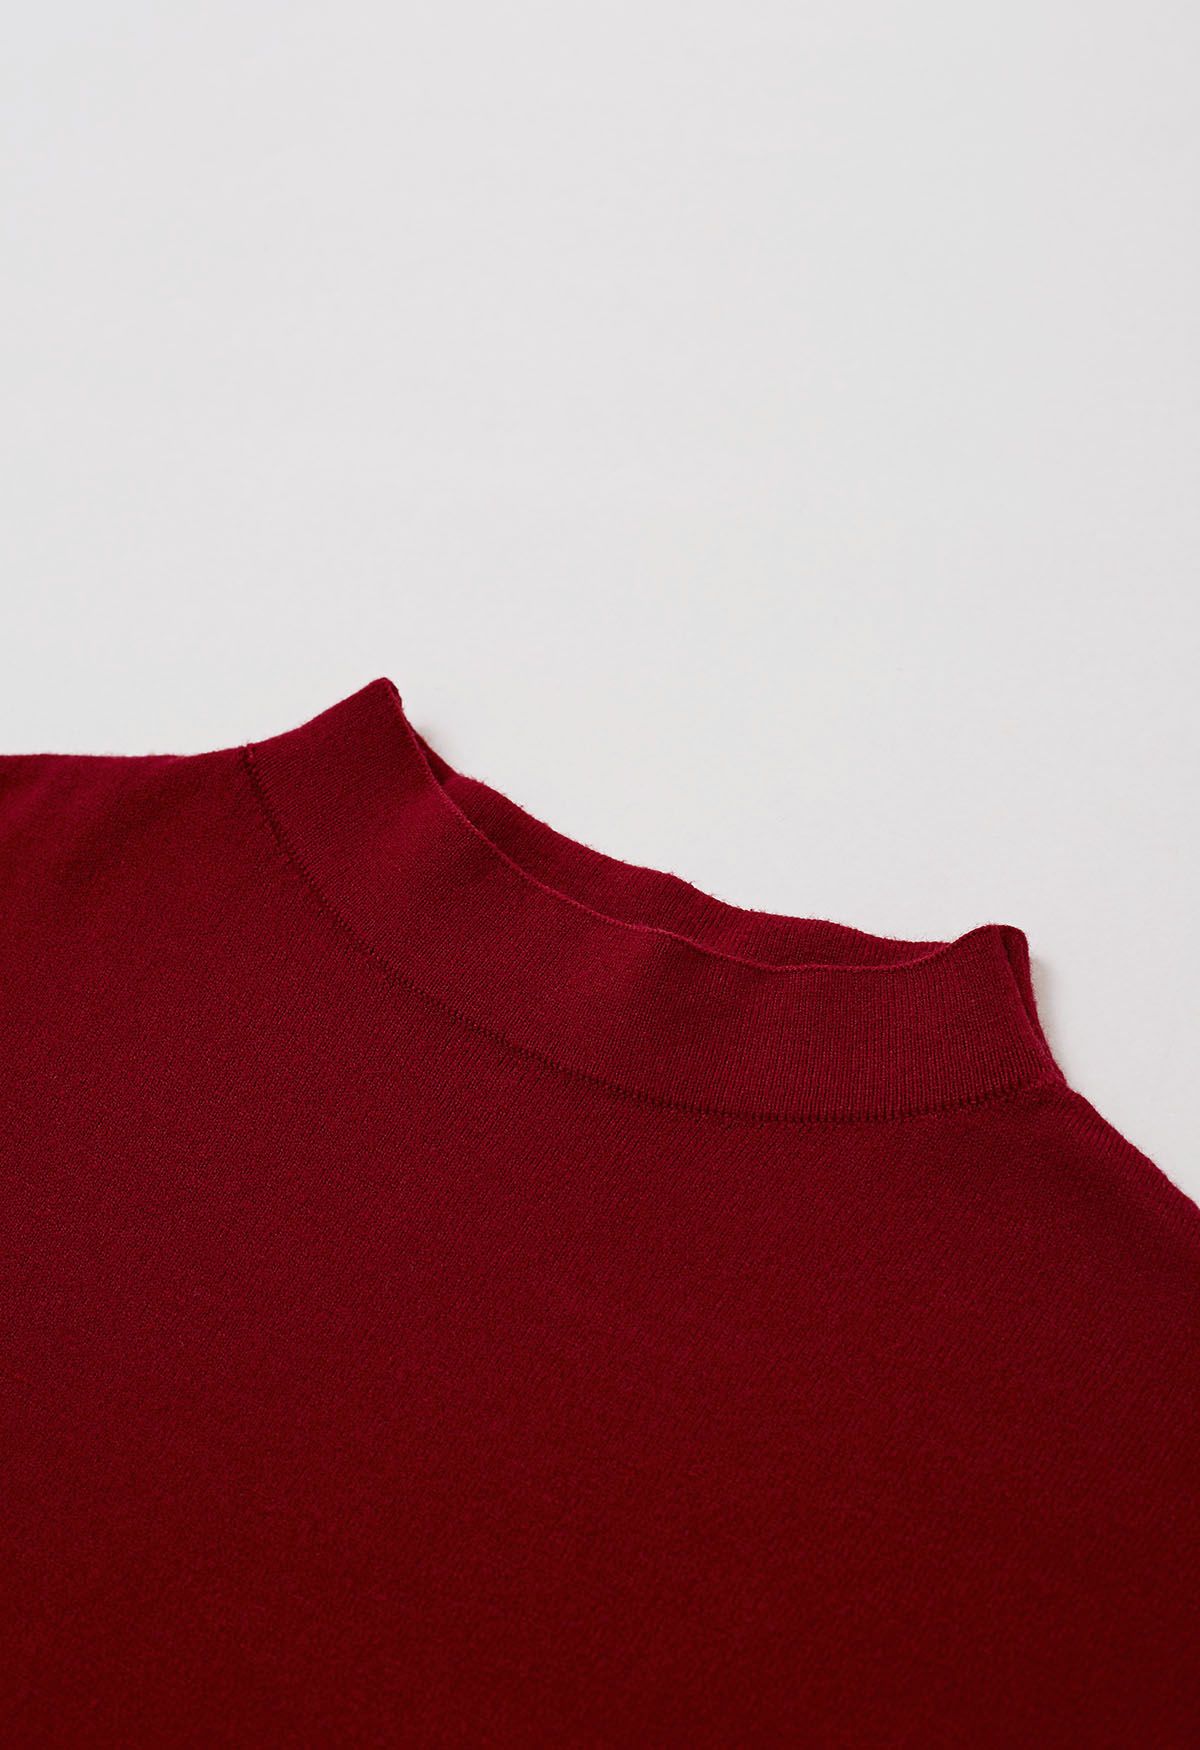 Solid Color Cap Sleeves Knit Top in Red